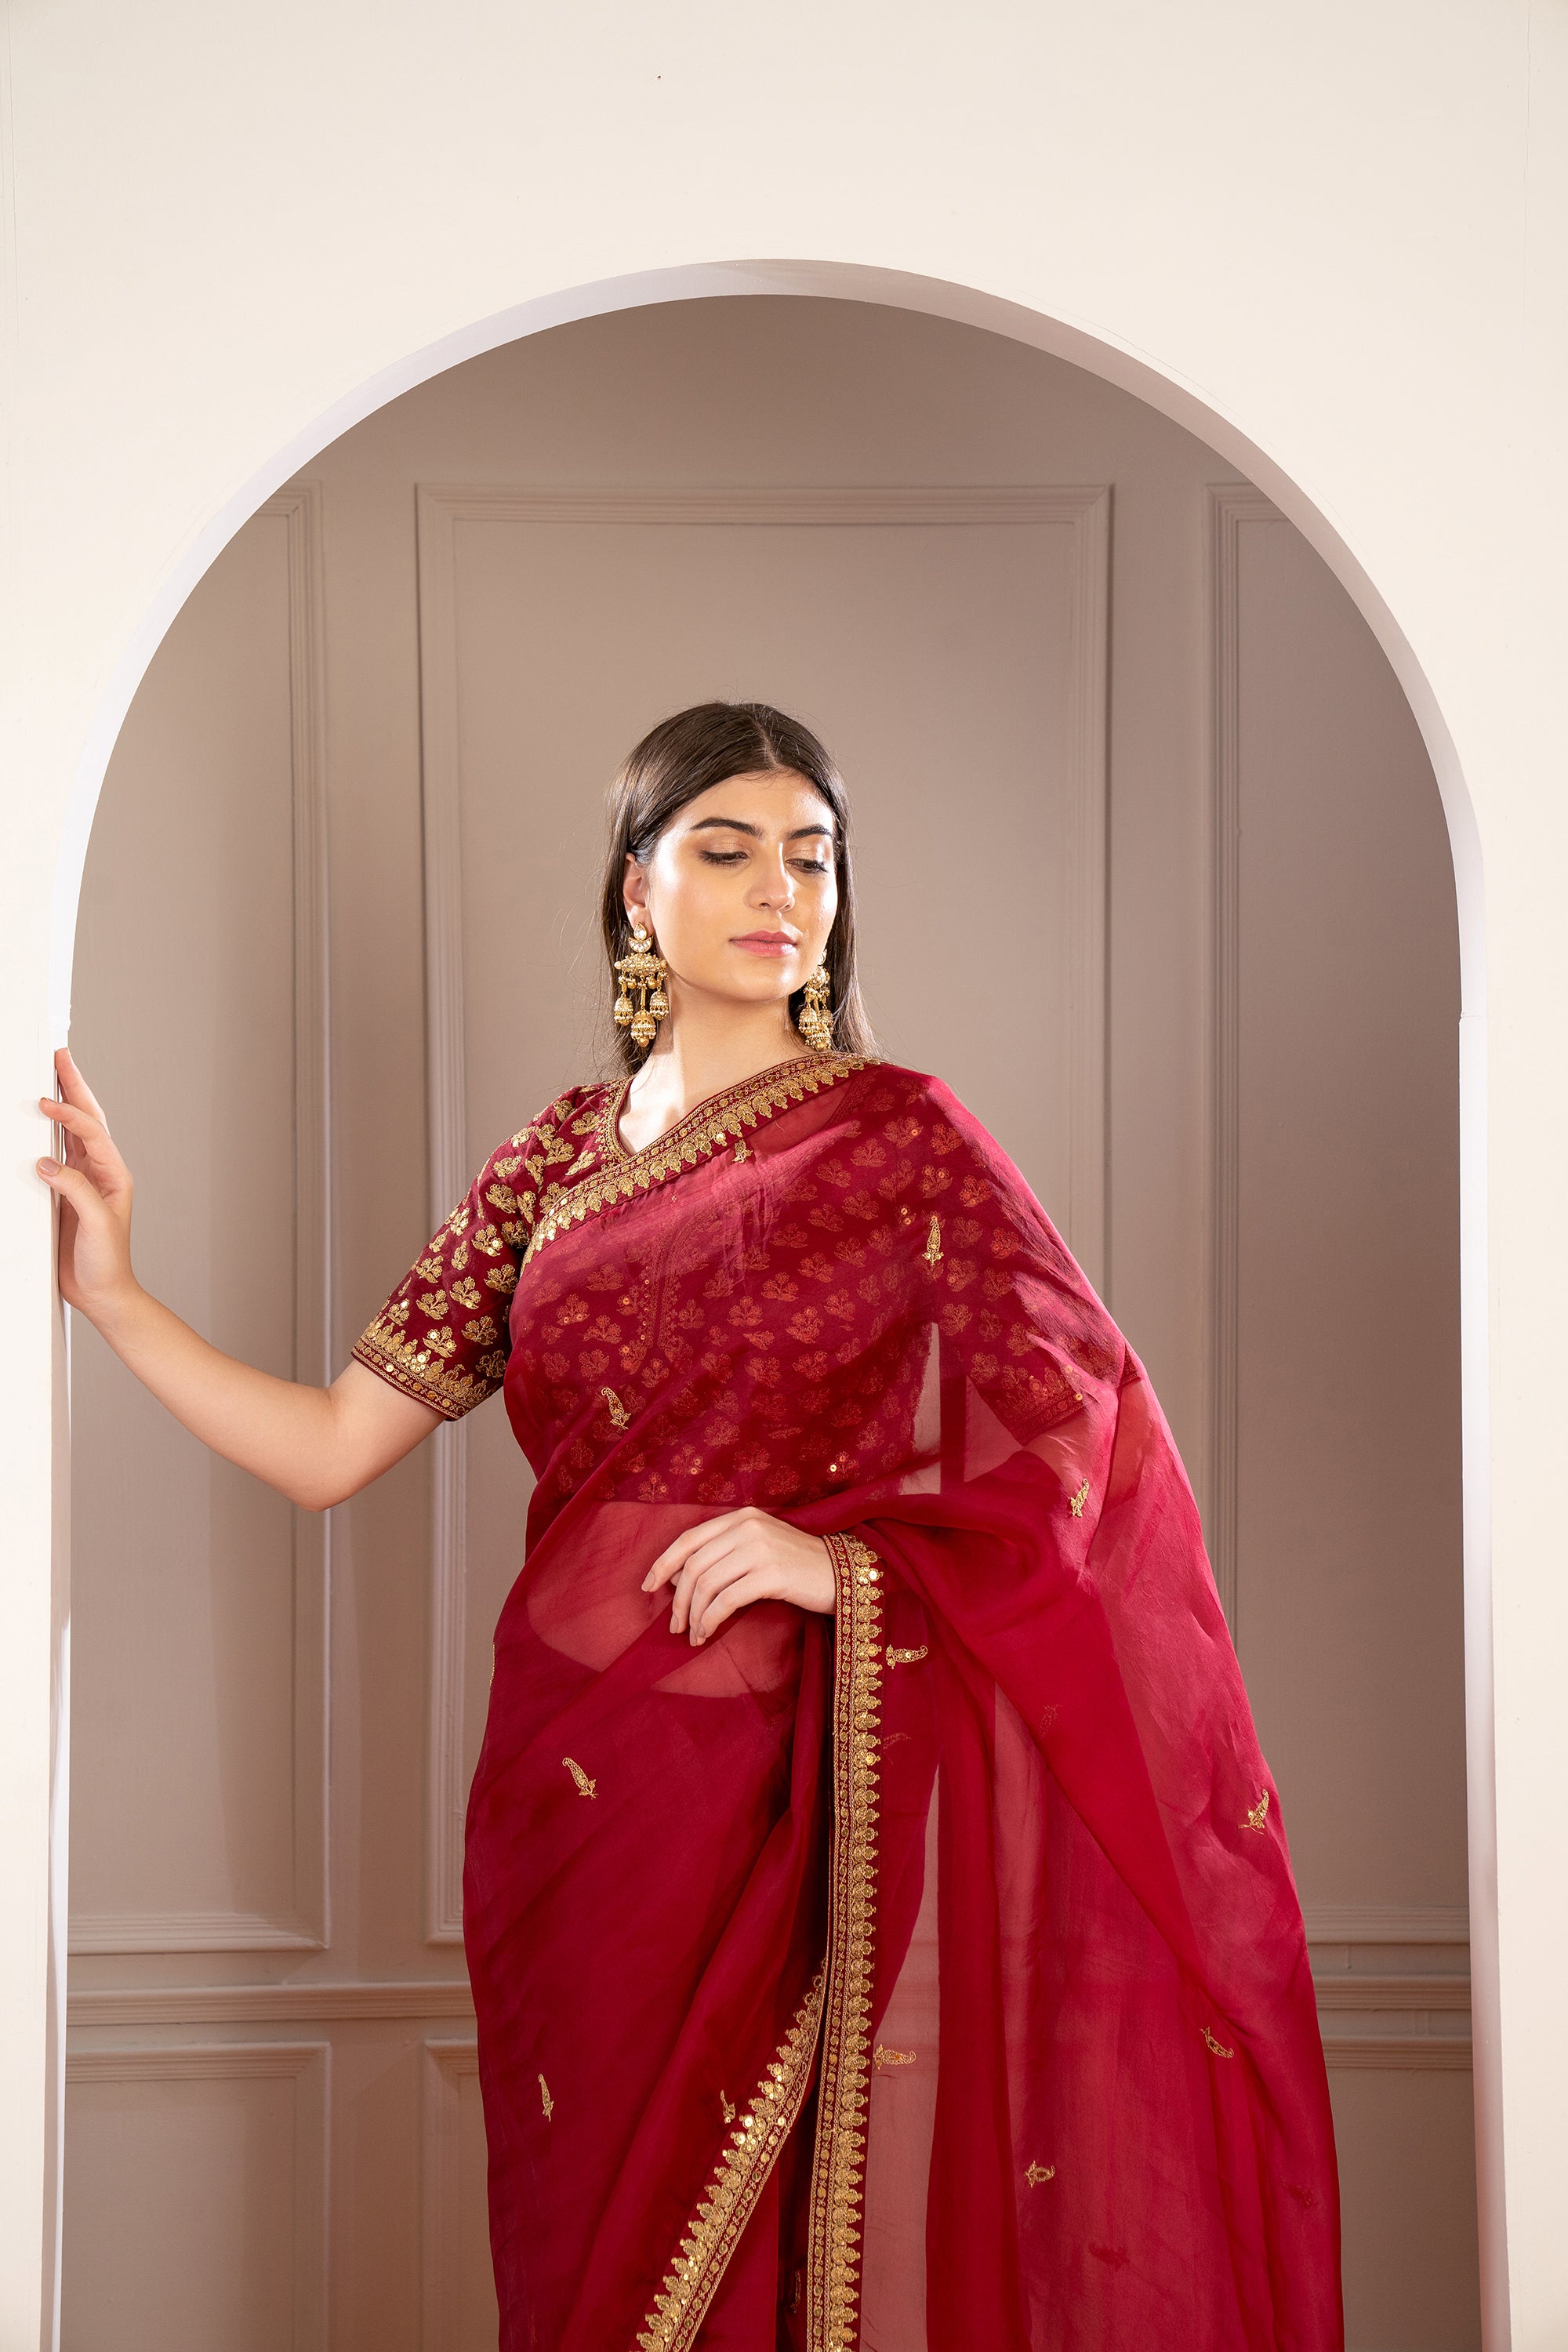 Shop Our Favorite Traditional Outfits Online